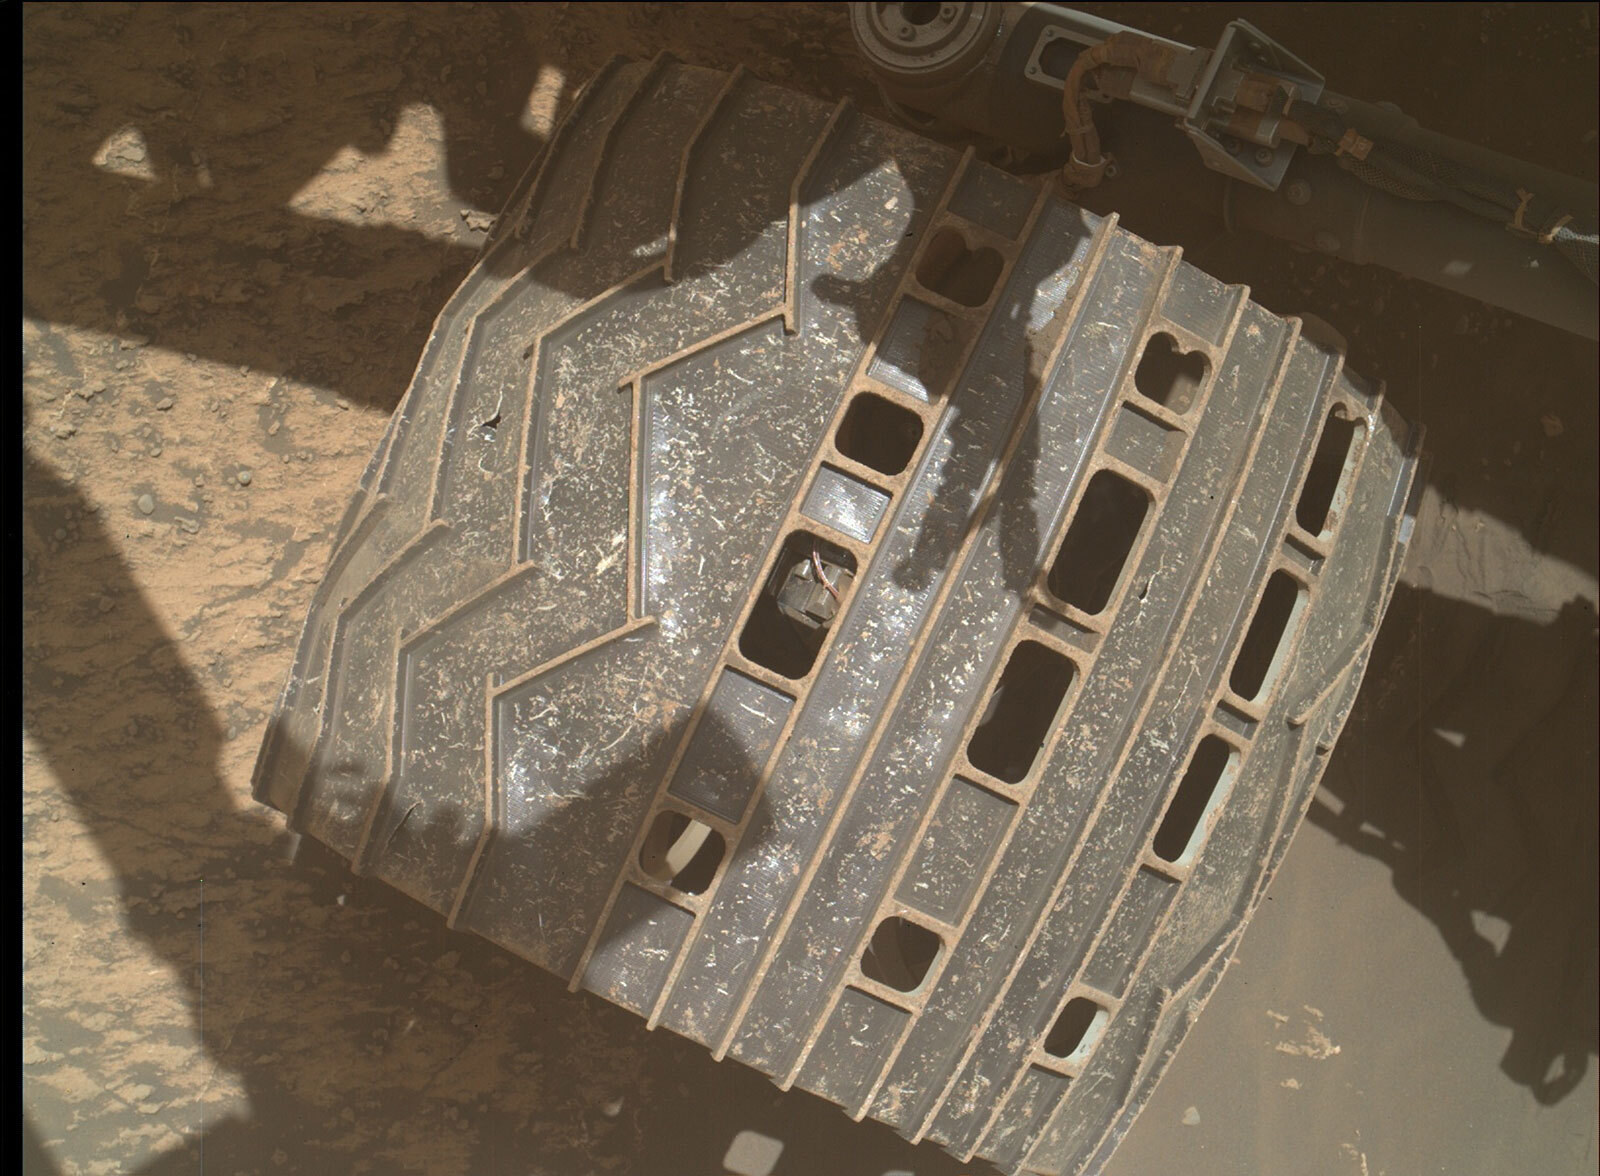 This is a large colored and zoomed in image of one of the wheels on Curiosity. The wheel is located on the sandy surface of Mars. Curiosity's shadow is reflected on the surface. 